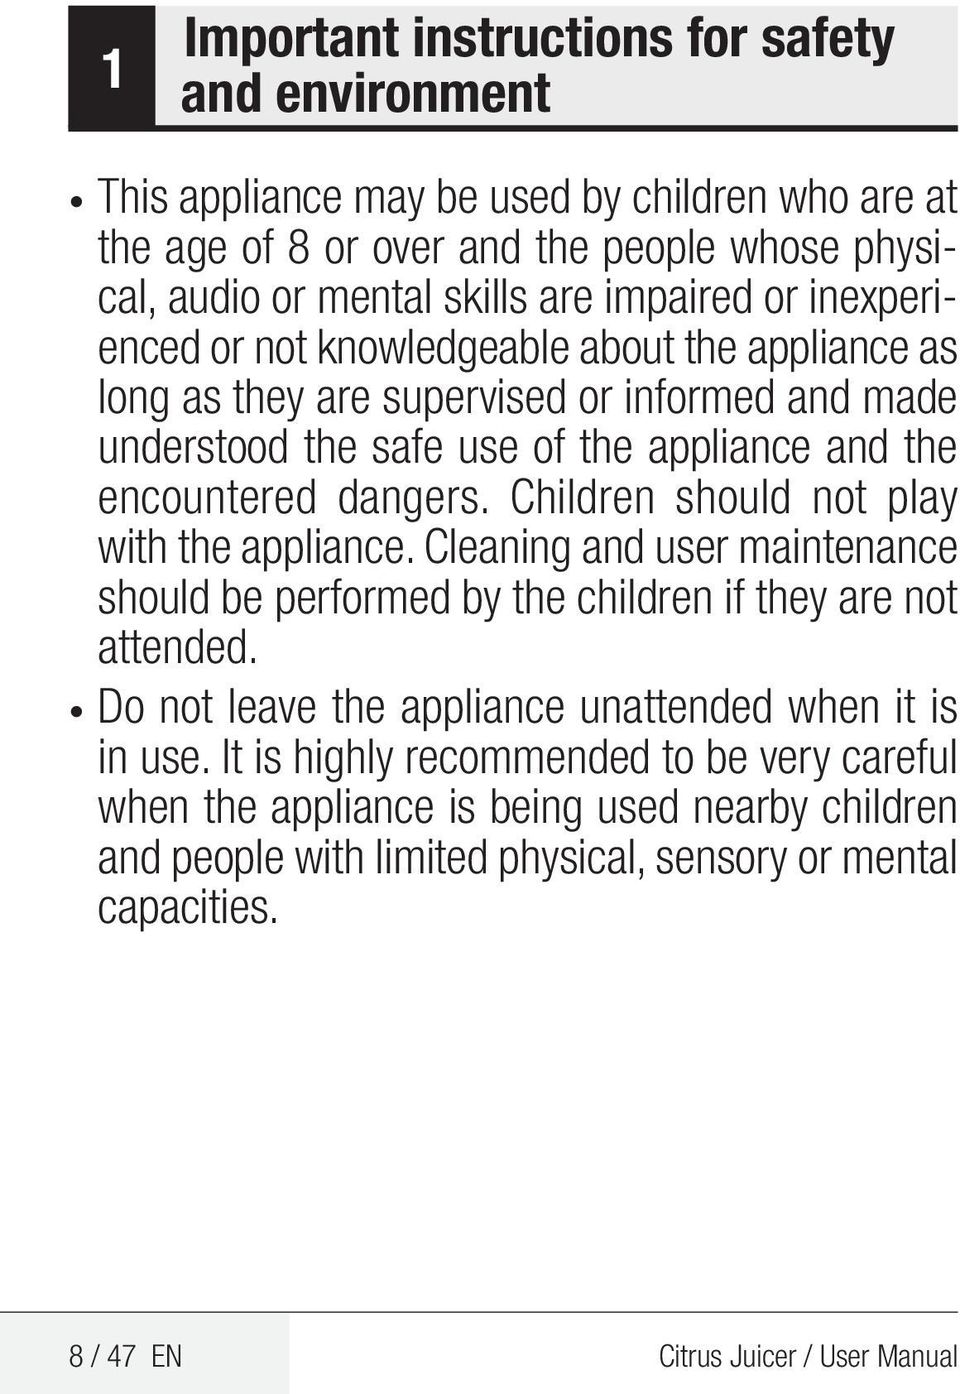 Children should not play with the appliance. Cleaning and user maintenance should be performed by the children if they are not attended.